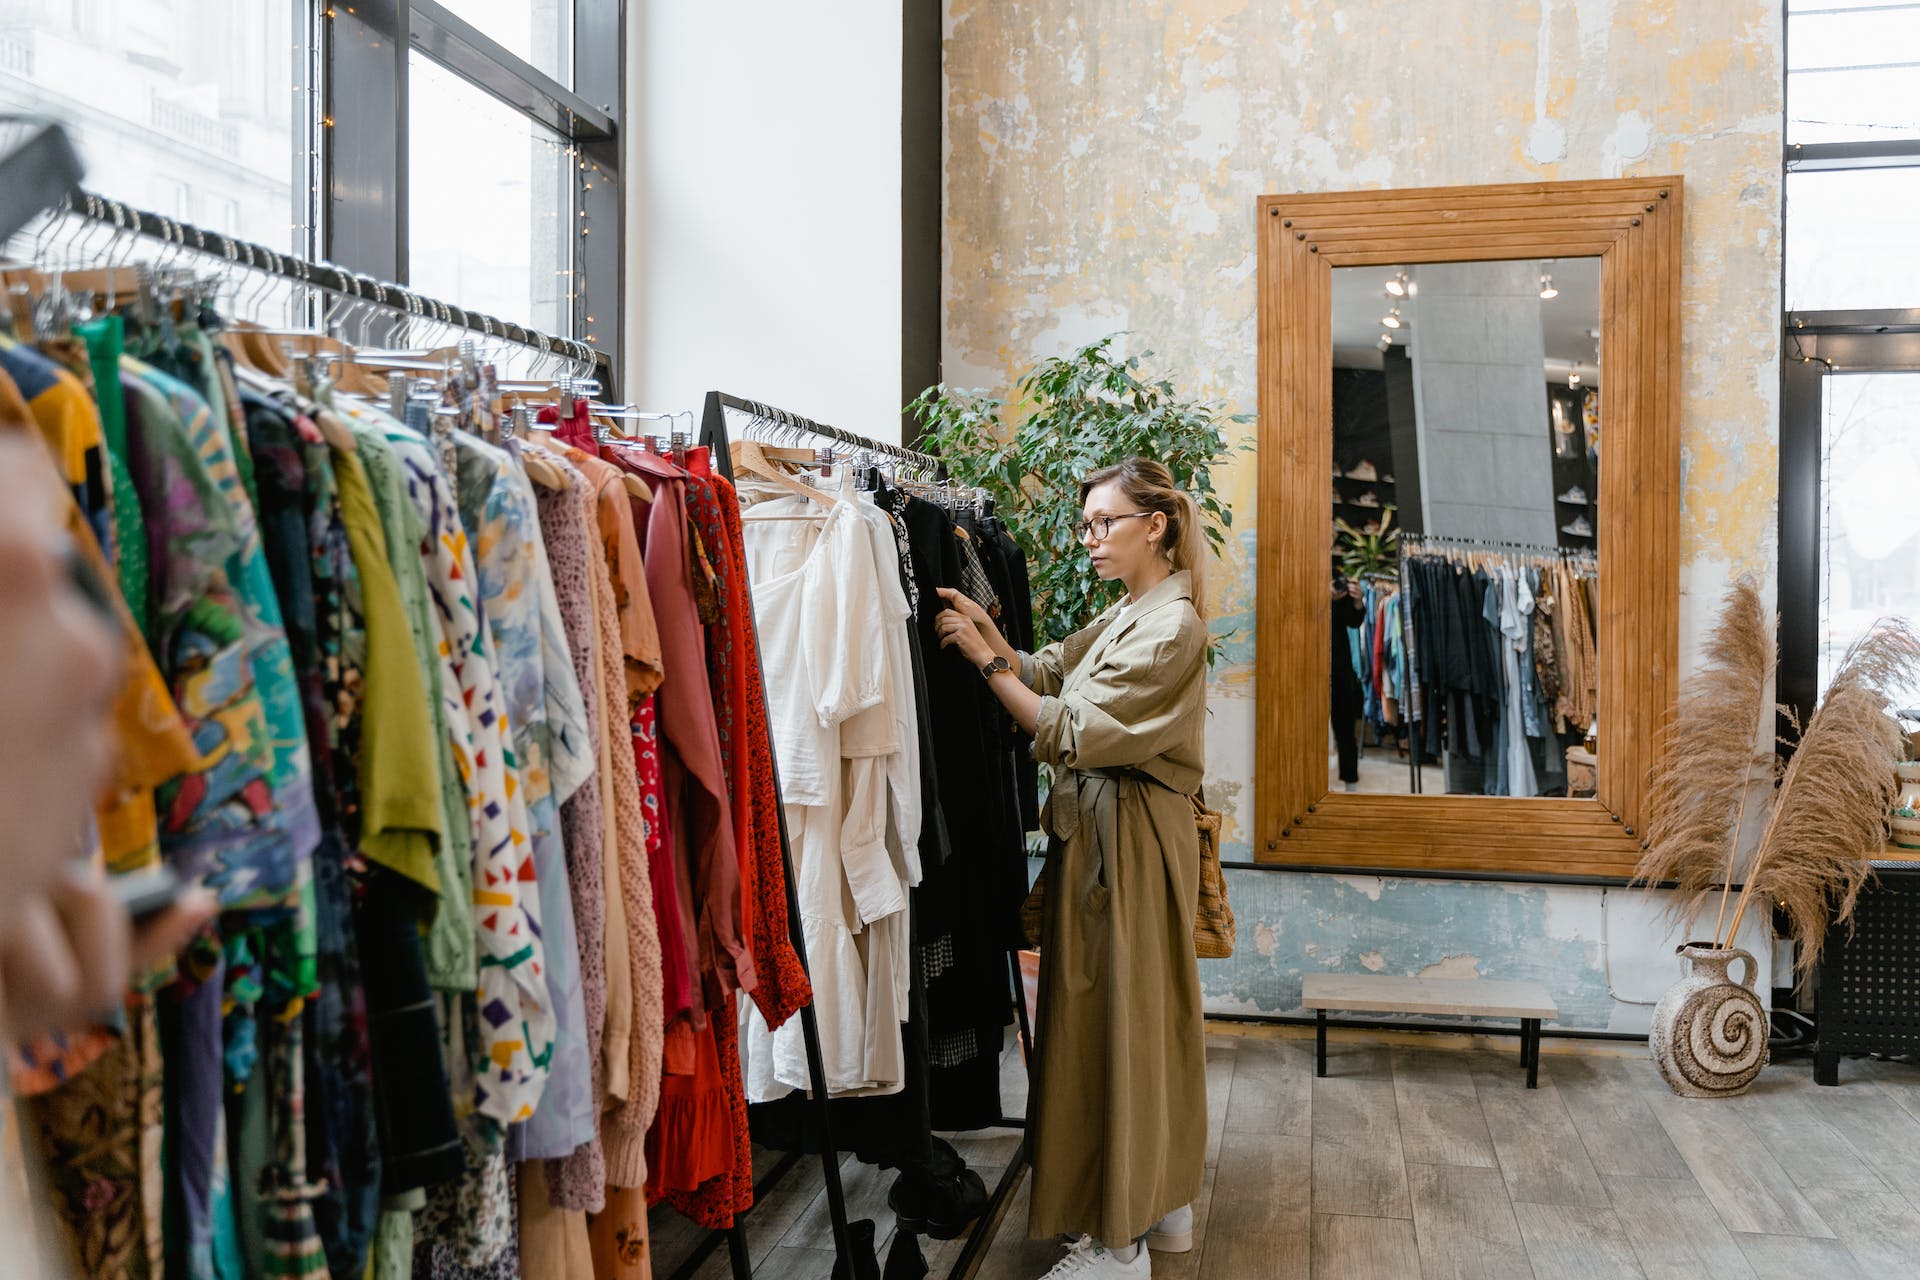 Woman browsing a clothing store | Source: Pexels